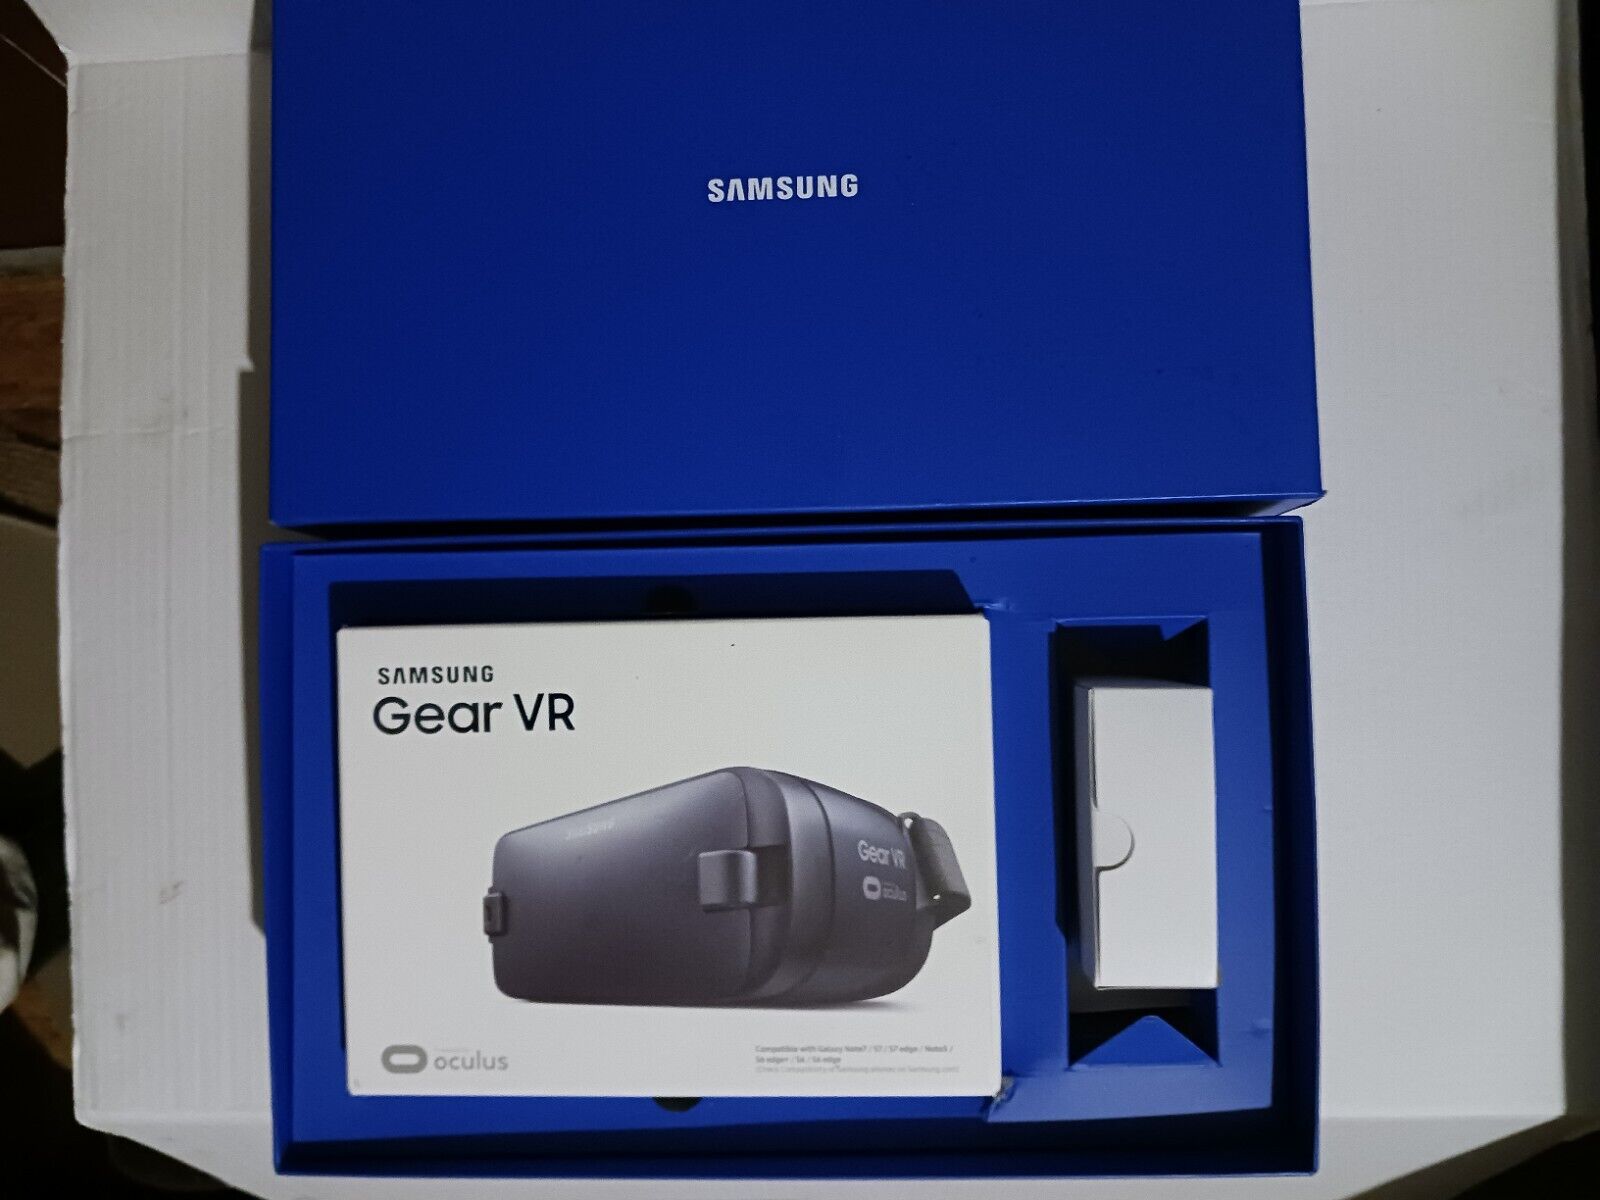 Samsung Gear VR - Compatible with Galaxy Note7/S7/S7 Edge/Note 5/S6 Edge+/Edge 6 Samsung Samsung Gear VR - фотография #3